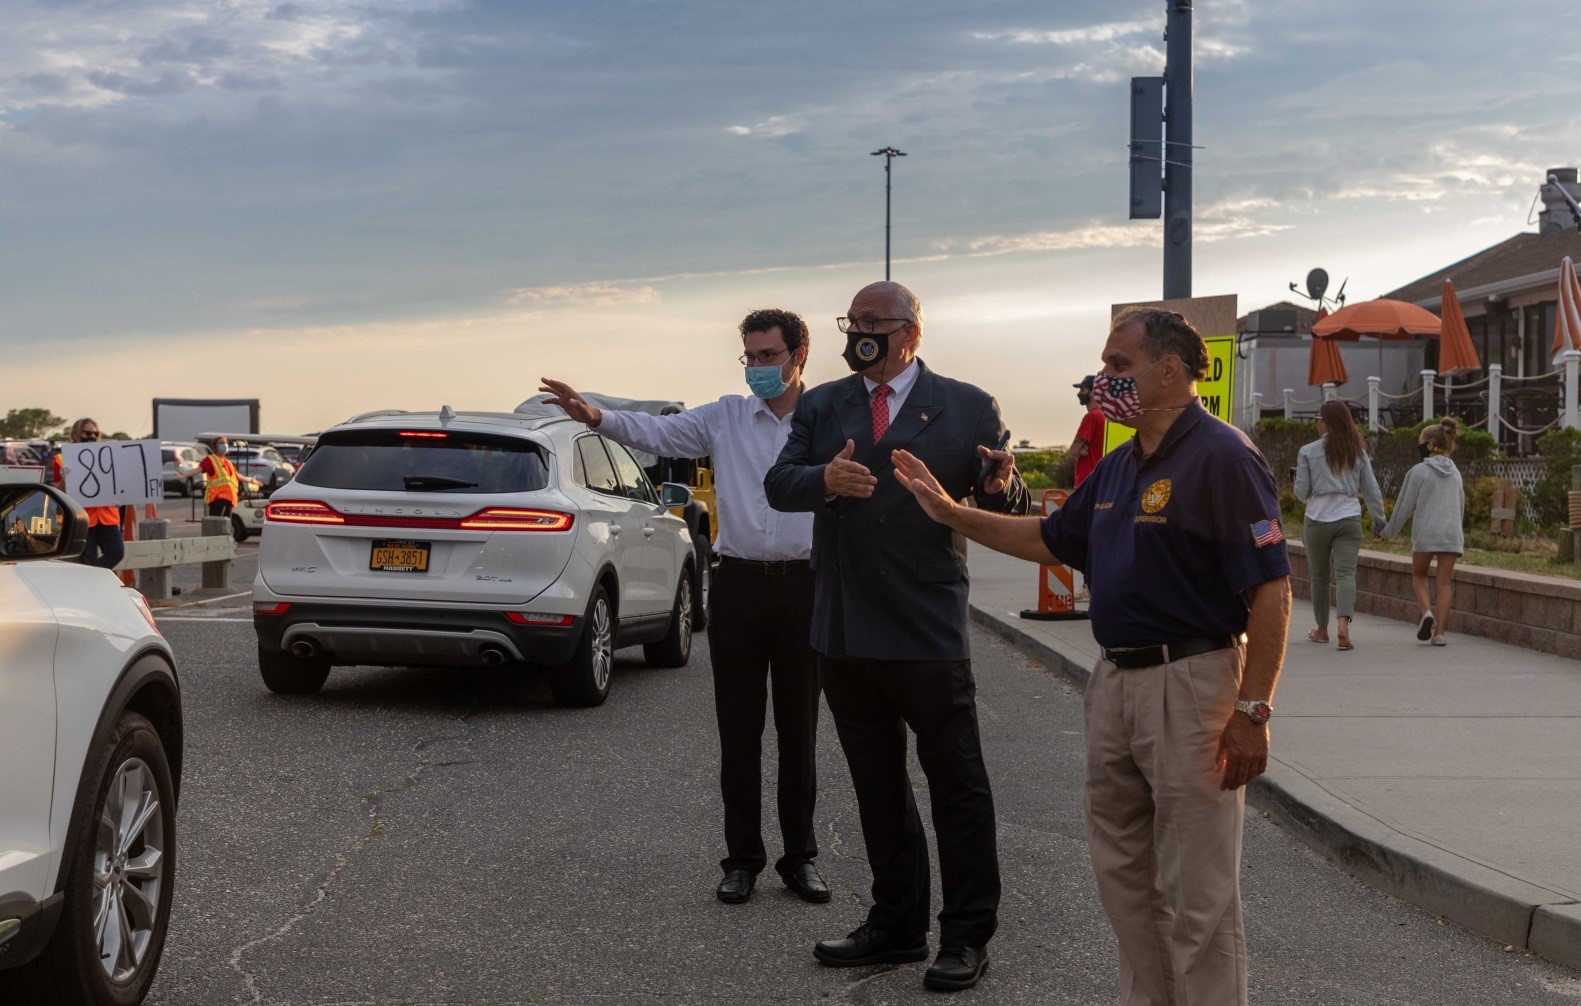 Assemblyman John Mikulin (R,C,I-Bethpage) joined Town of Hempstead Councilman Dennis Dunne, and Town of Oyster Bay Supervisor Joseph Saladino to support the Town of Oyster Bay drive-in movie event on